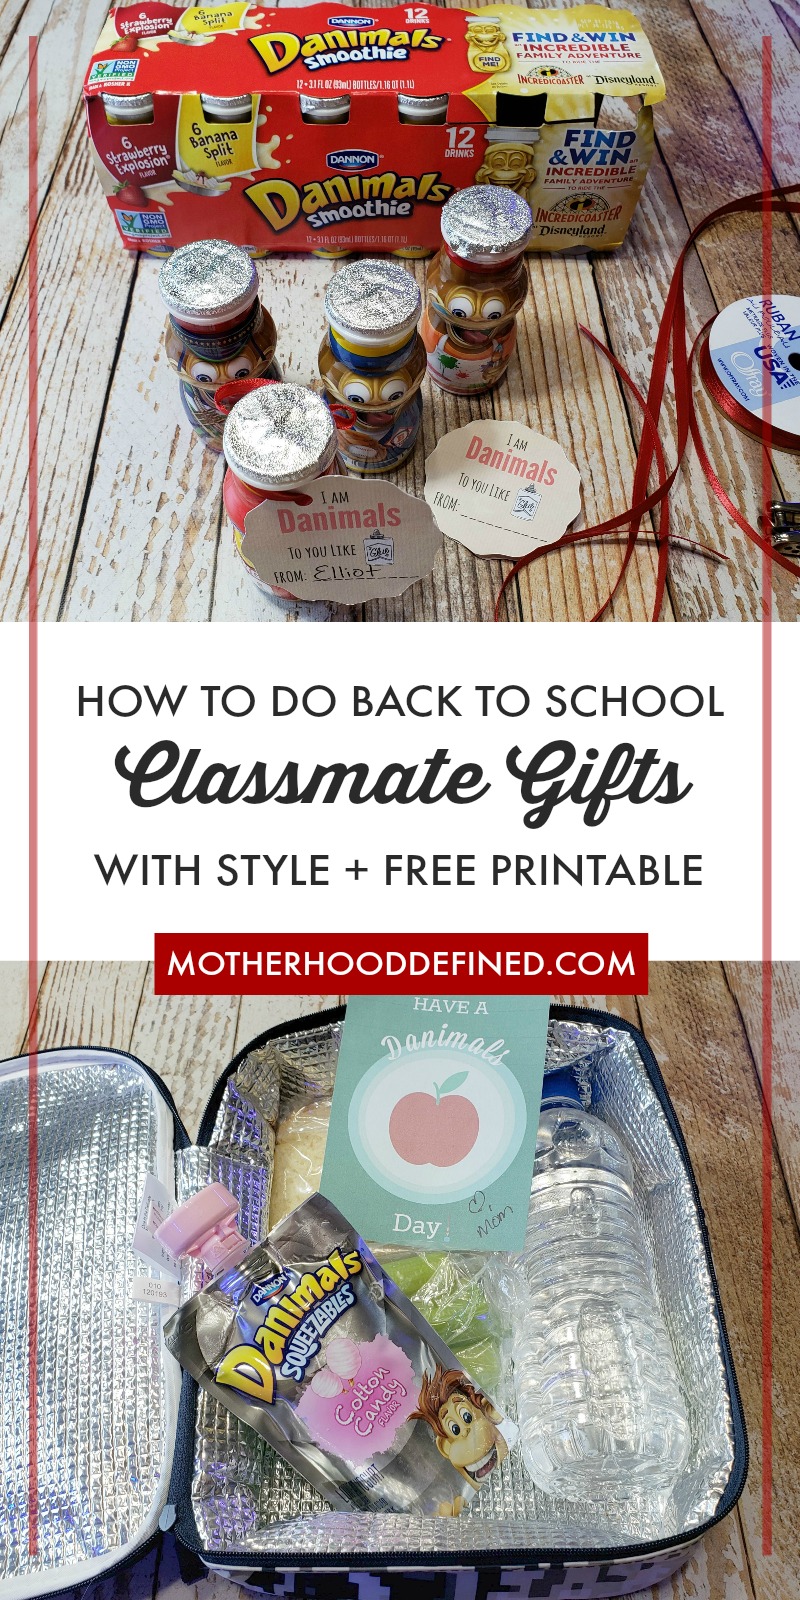 How to do Back to School Classmate Gifts with Style + Free Printables #SnackToSchool #CollectiveBias